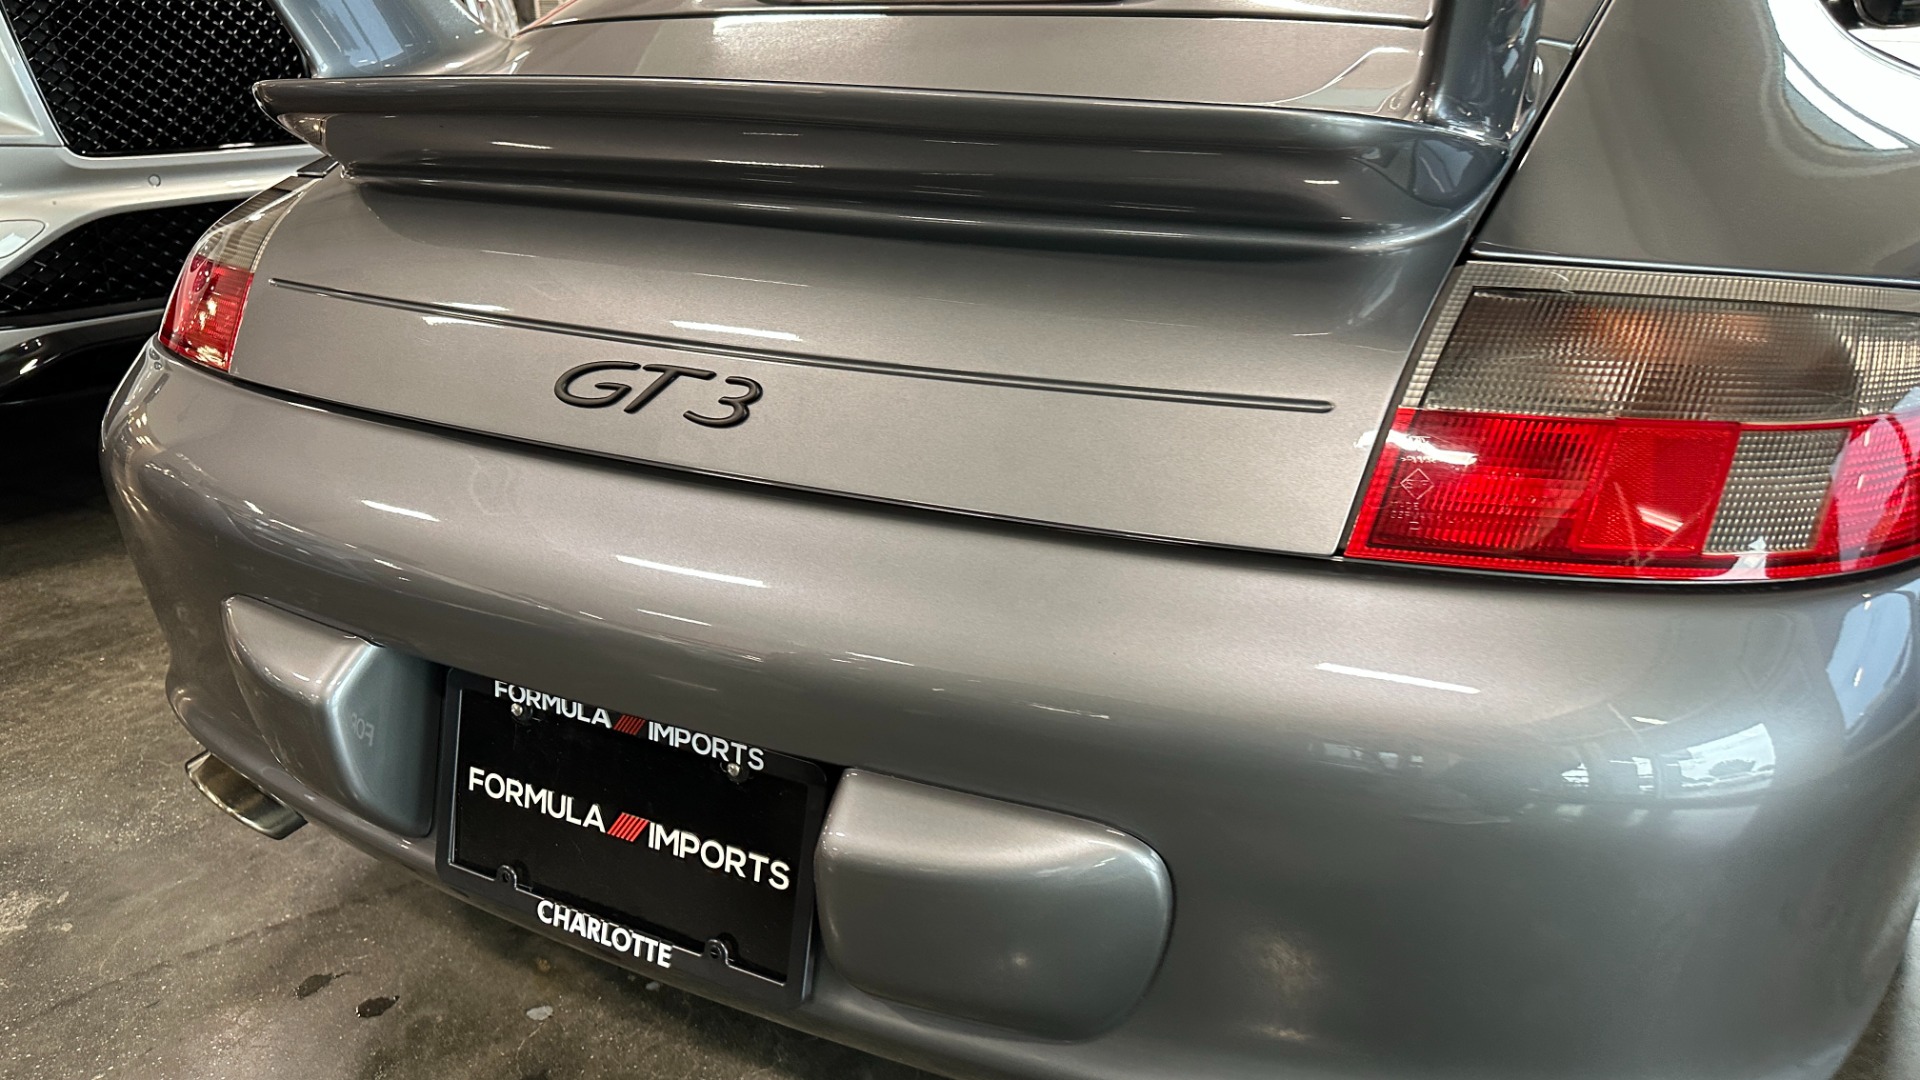 Used 2004 Porsche 911 GT3 / SPORTS SEATS / SERVICE BINDER / CLEAN DME for sale $121,900 at Formula Imports in Charlotte NC 28227 21